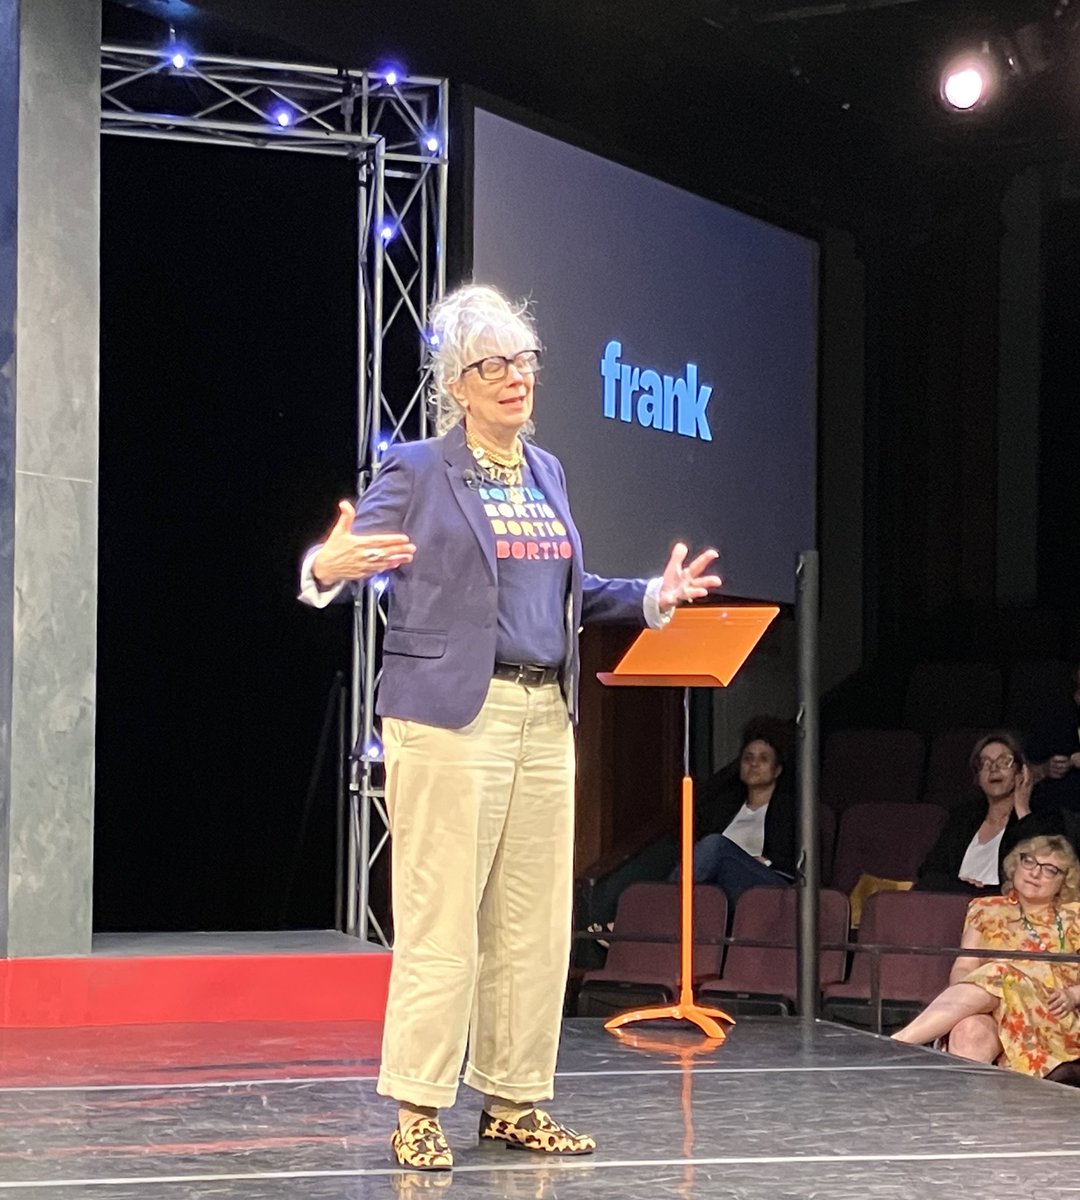 .@Lizzwinstead is a badass with a deep heart, whose tears of gratitude for the people at frank shows just how much she cares about making the world better. Thank you, Lizz. To quote @annsearight, “frank wouldn’t be the same without Lizz.” #frank2023